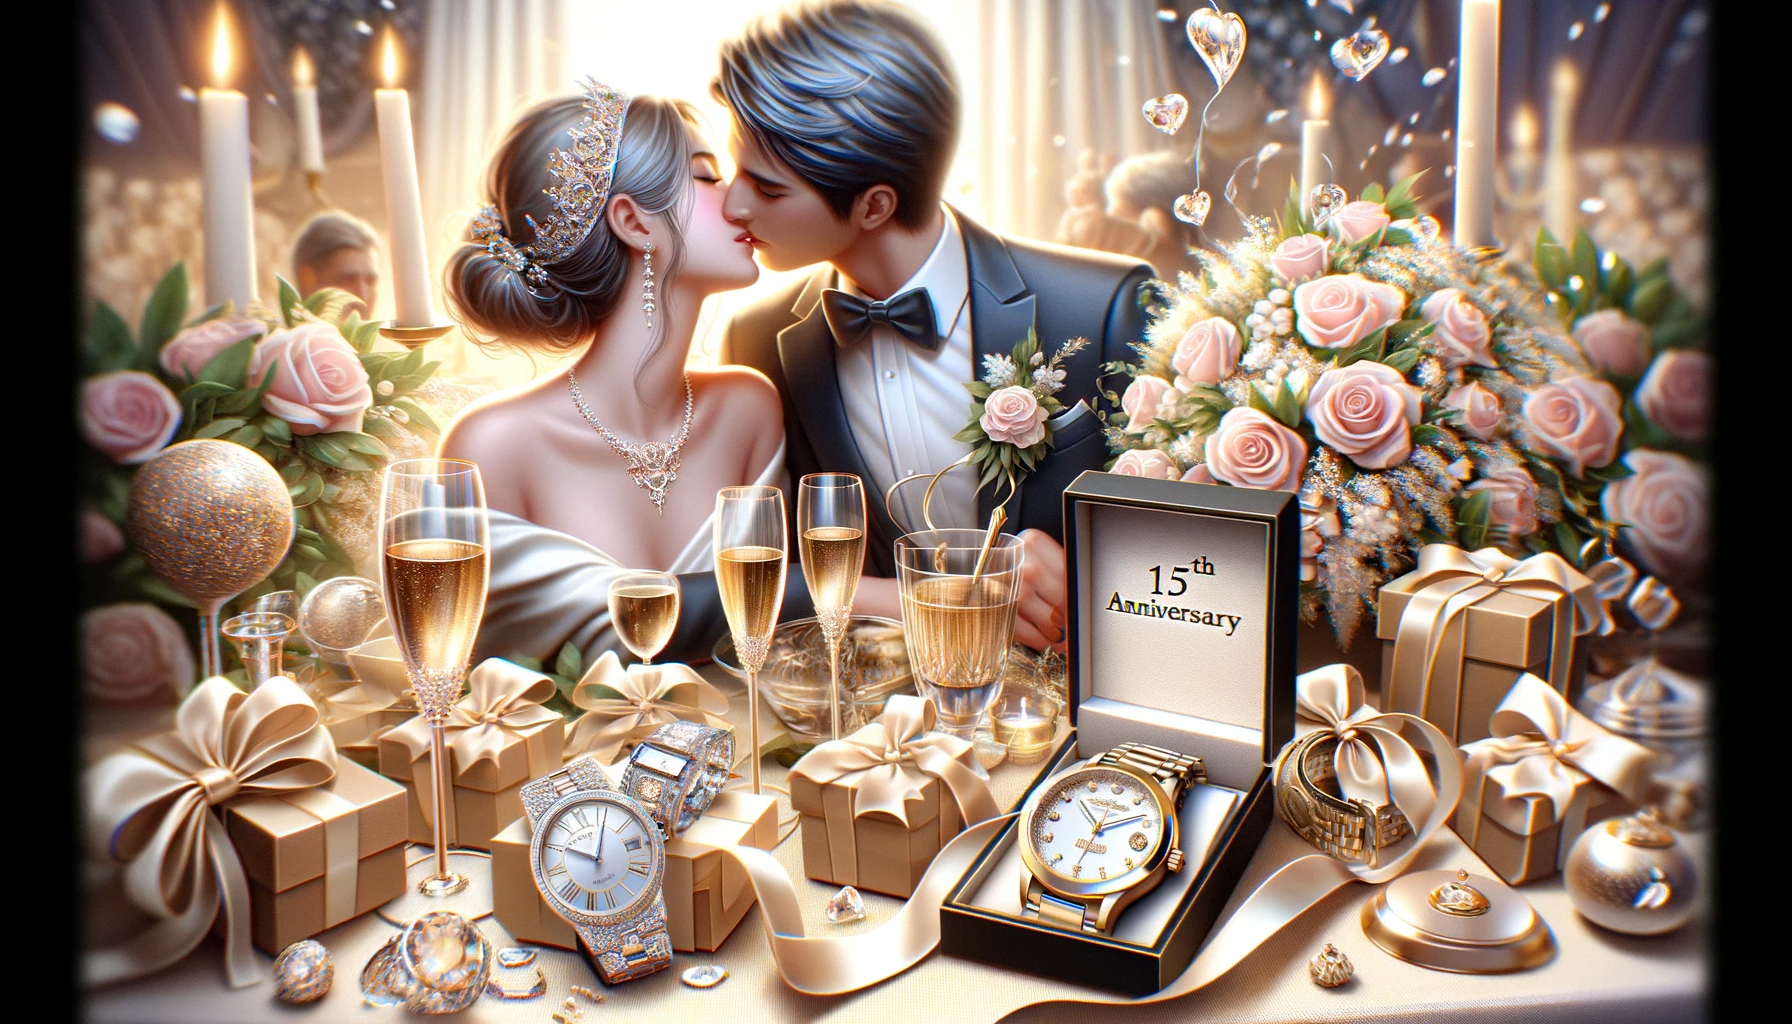 A beautiful and elegant image ideal for a featured article about the 15th wedding anniversary. The image should include elements representing the 15th